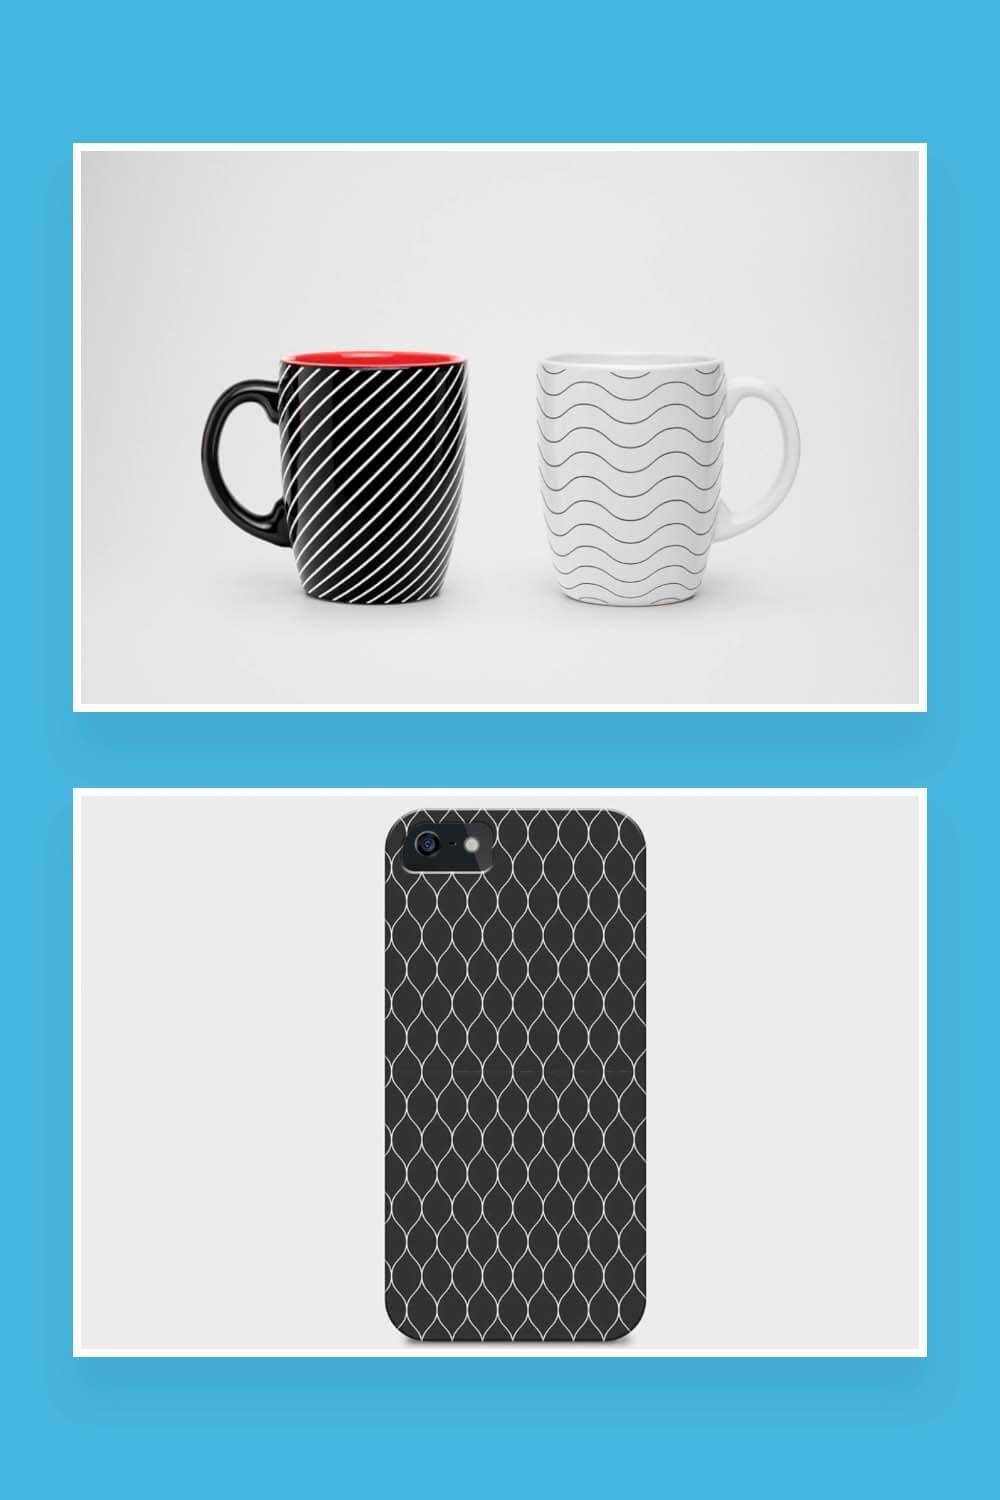 Collection of seamless simple vector patterns on cups and phone bumper.